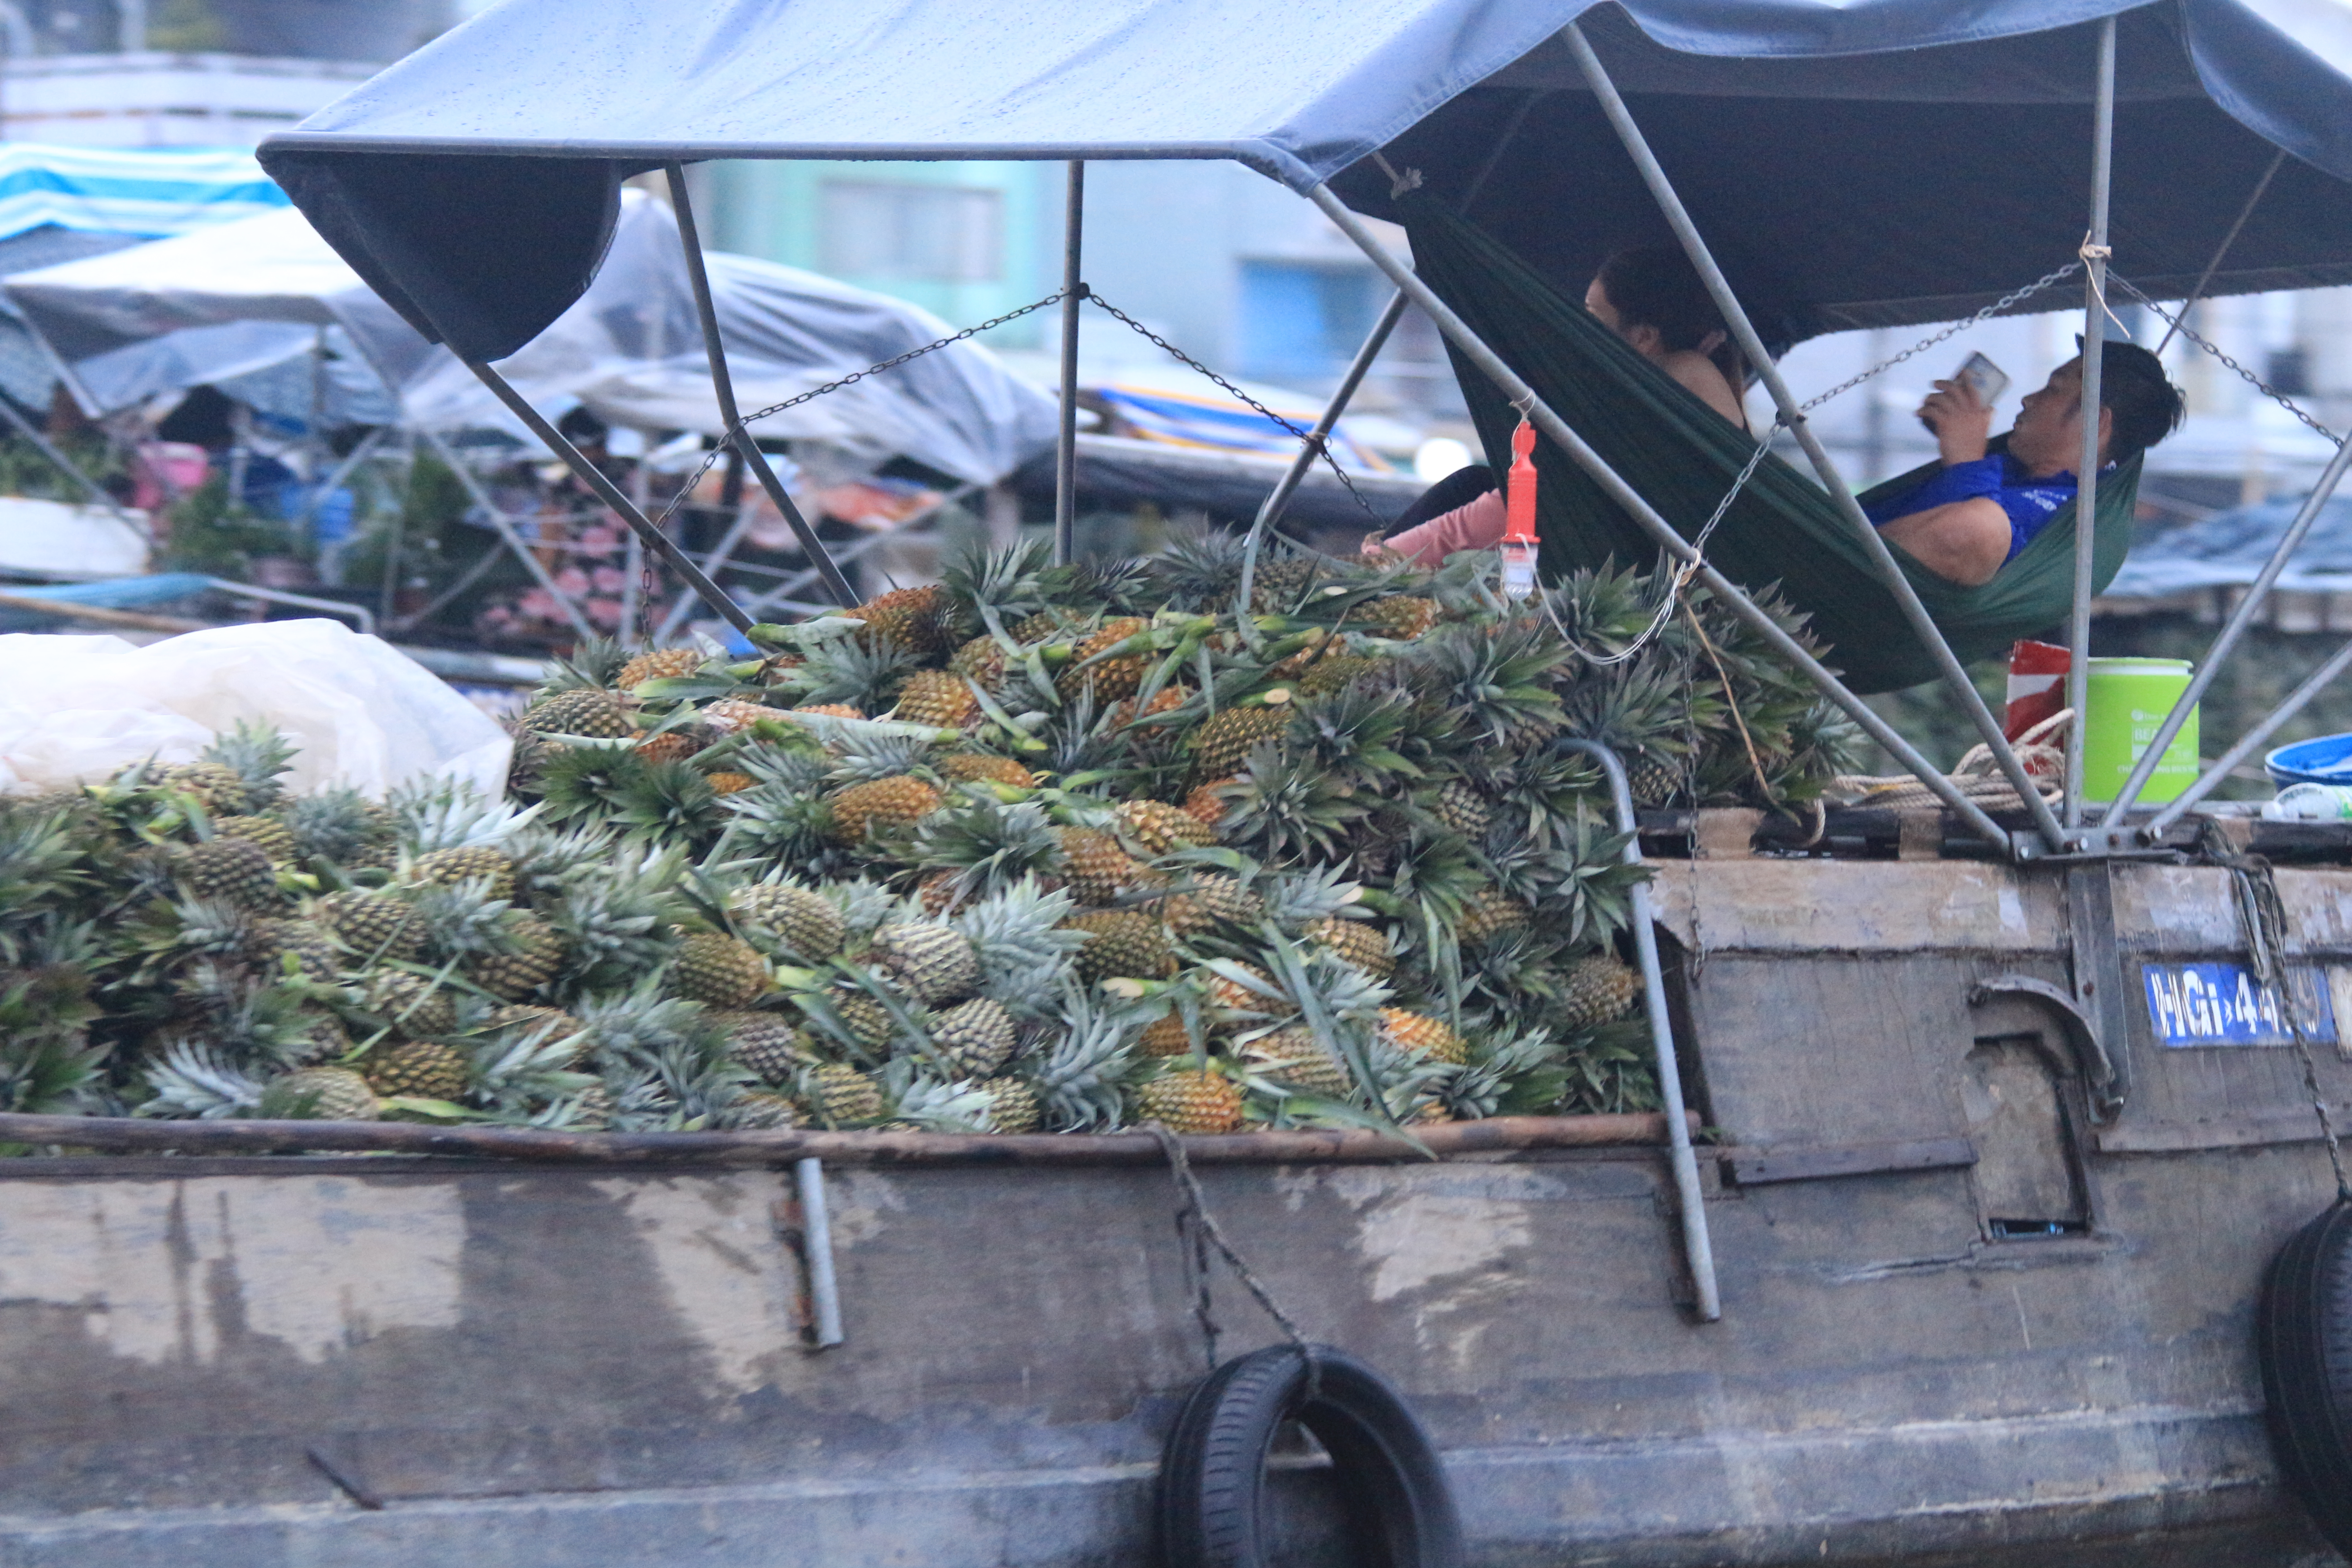 A boat carries pineapples on the Cai Rang Floating Market in Can Tho City, southern Vietnam. Photo: Ray Kuschert / Tuoi Tre News